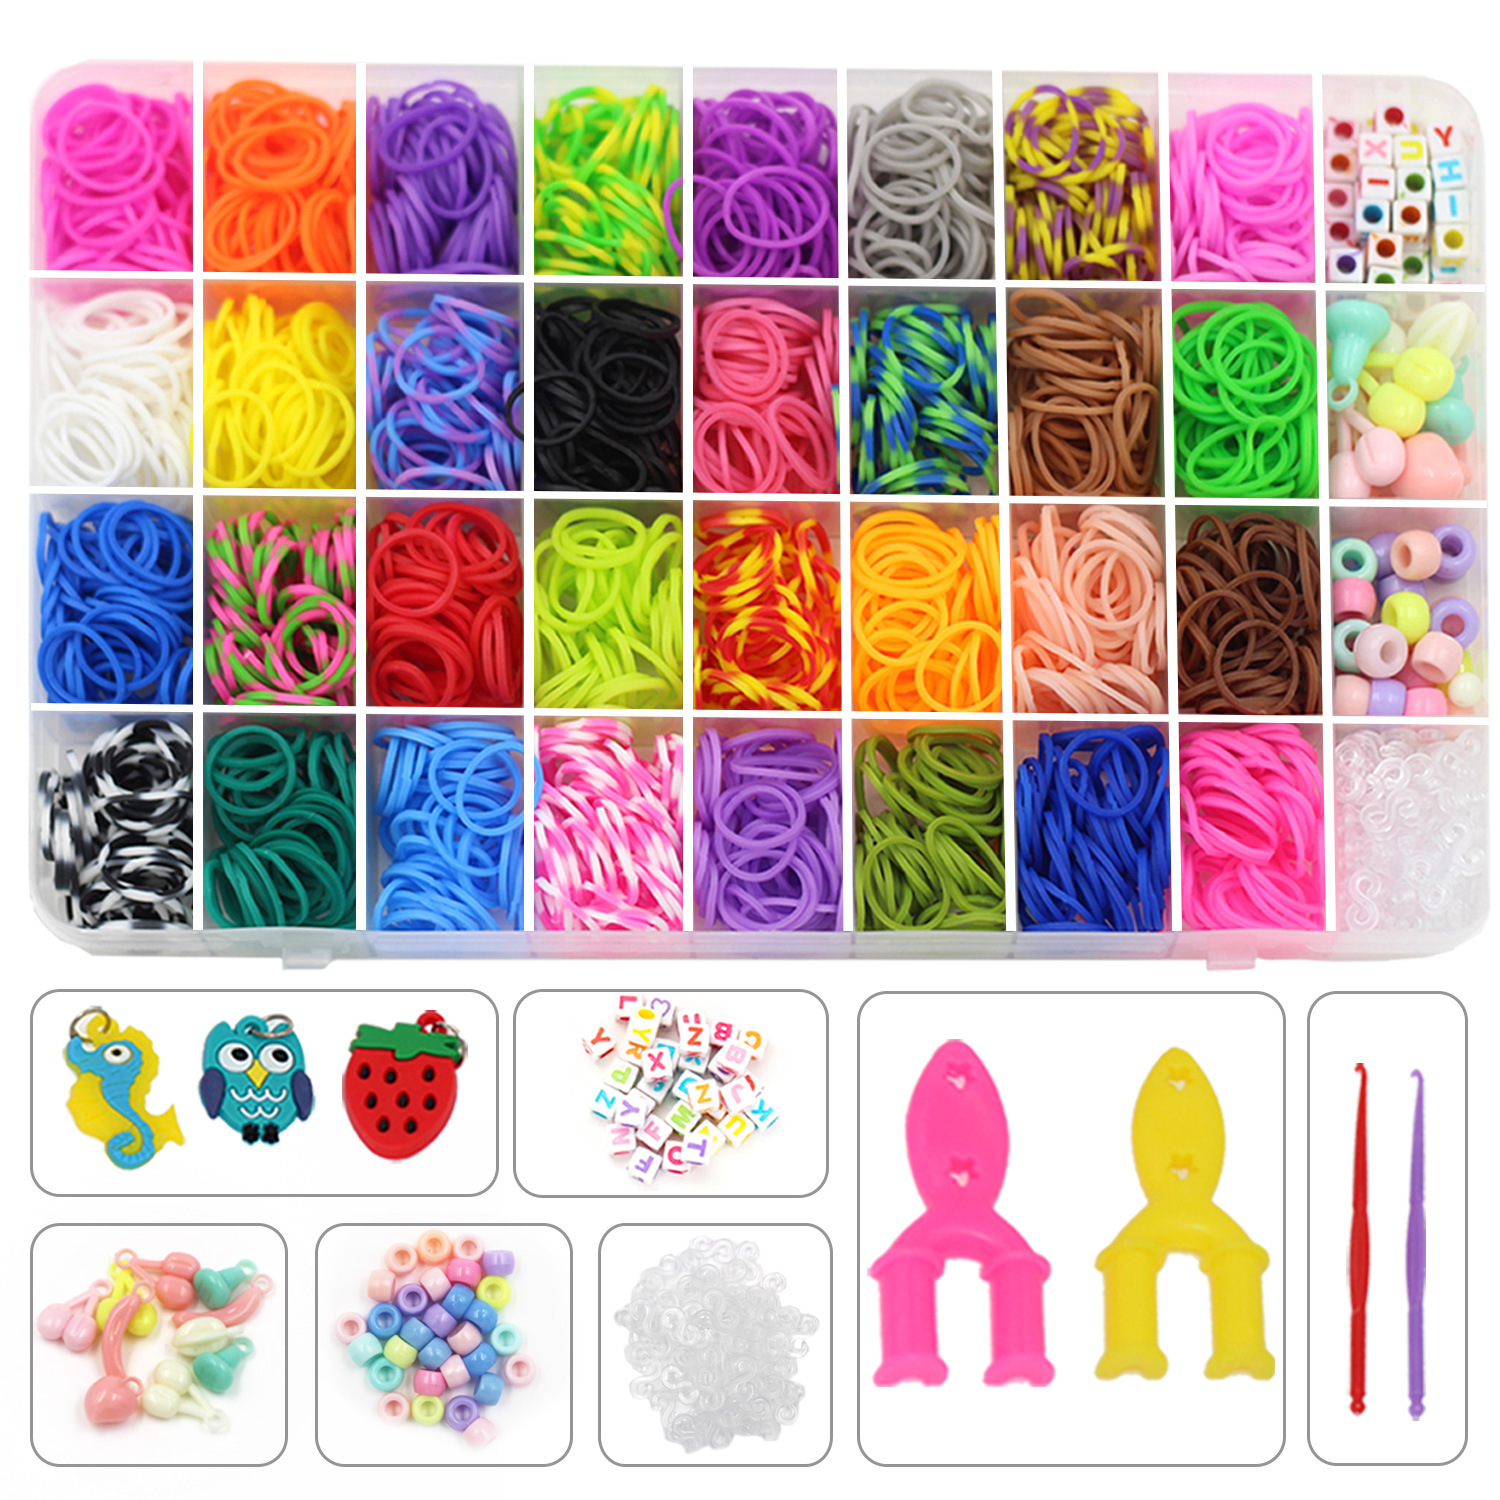 DIY Educational Children's Toys 36 Grid Rainbow Loom Loom Bands Rubber Band Set Woven Toy Bracelet